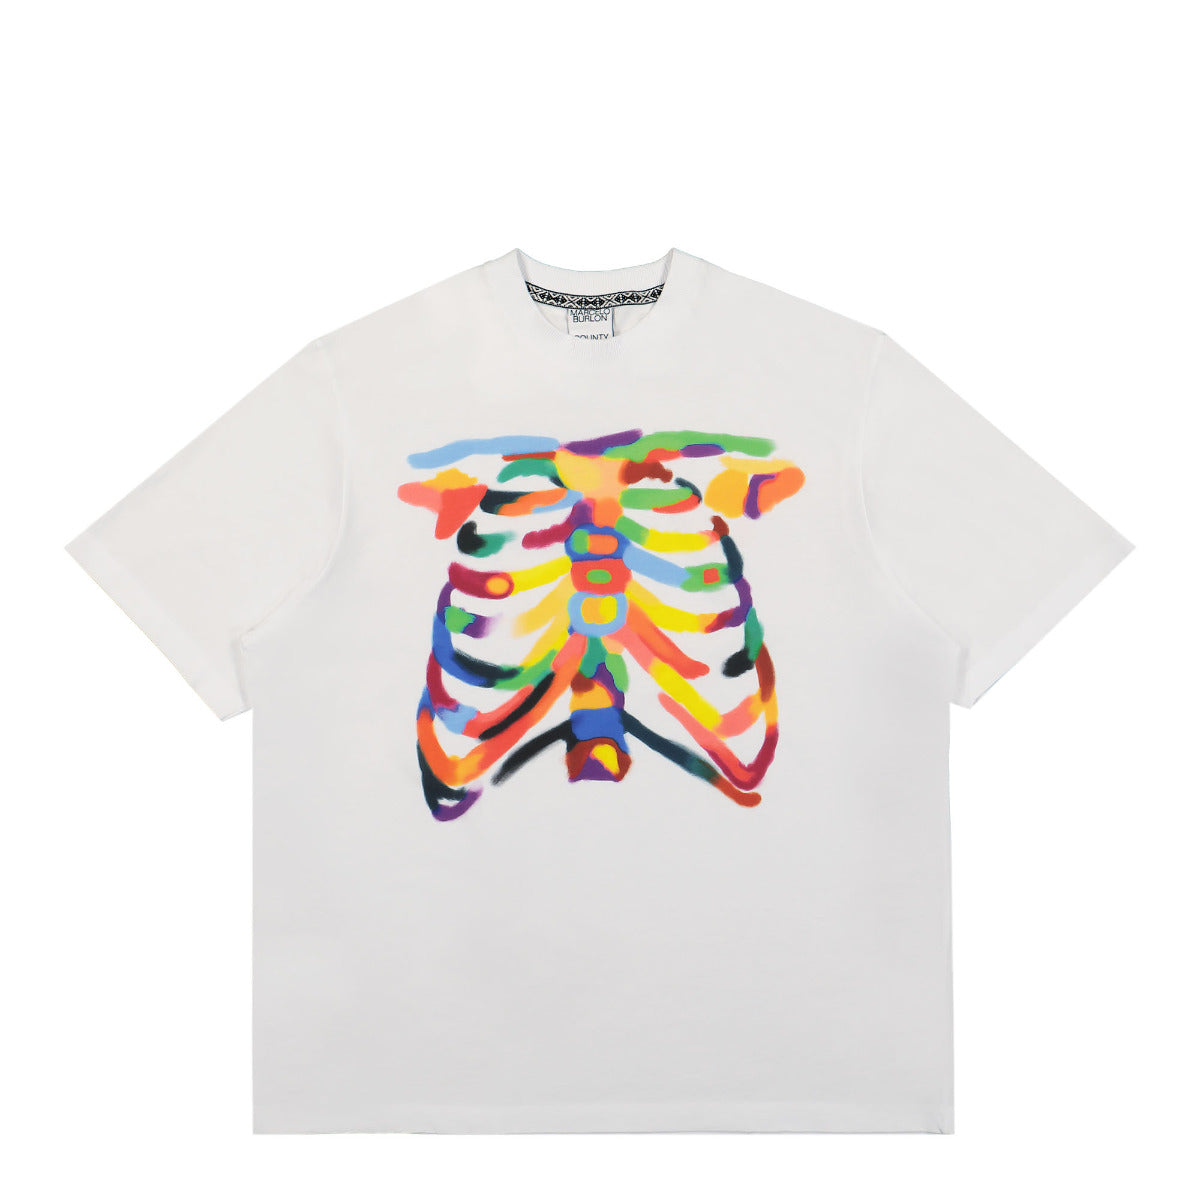 Rib Cage Over T-Shirt